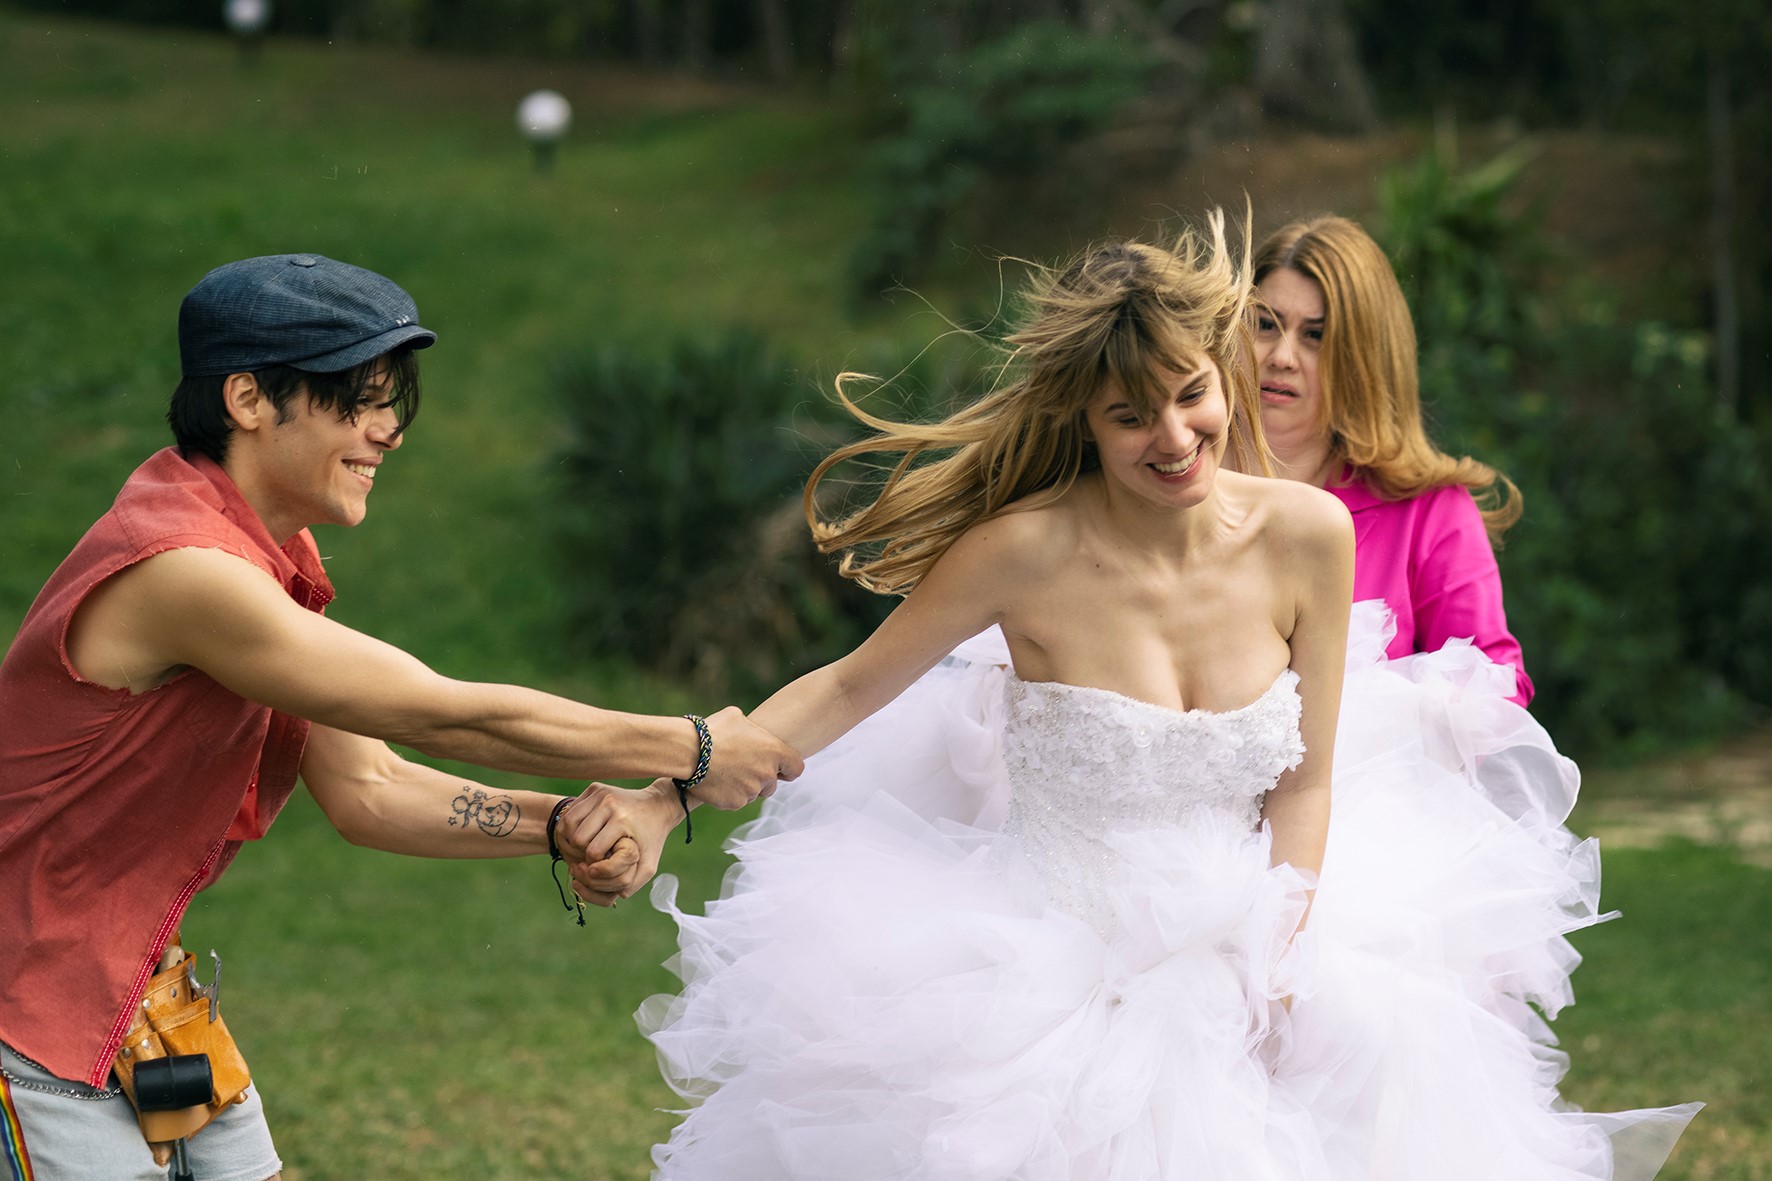 A young woman in a wedding dress seems to want to run, but is held by the arm of a young man. Both are laughing. In the background is another woman, but she looks serious.